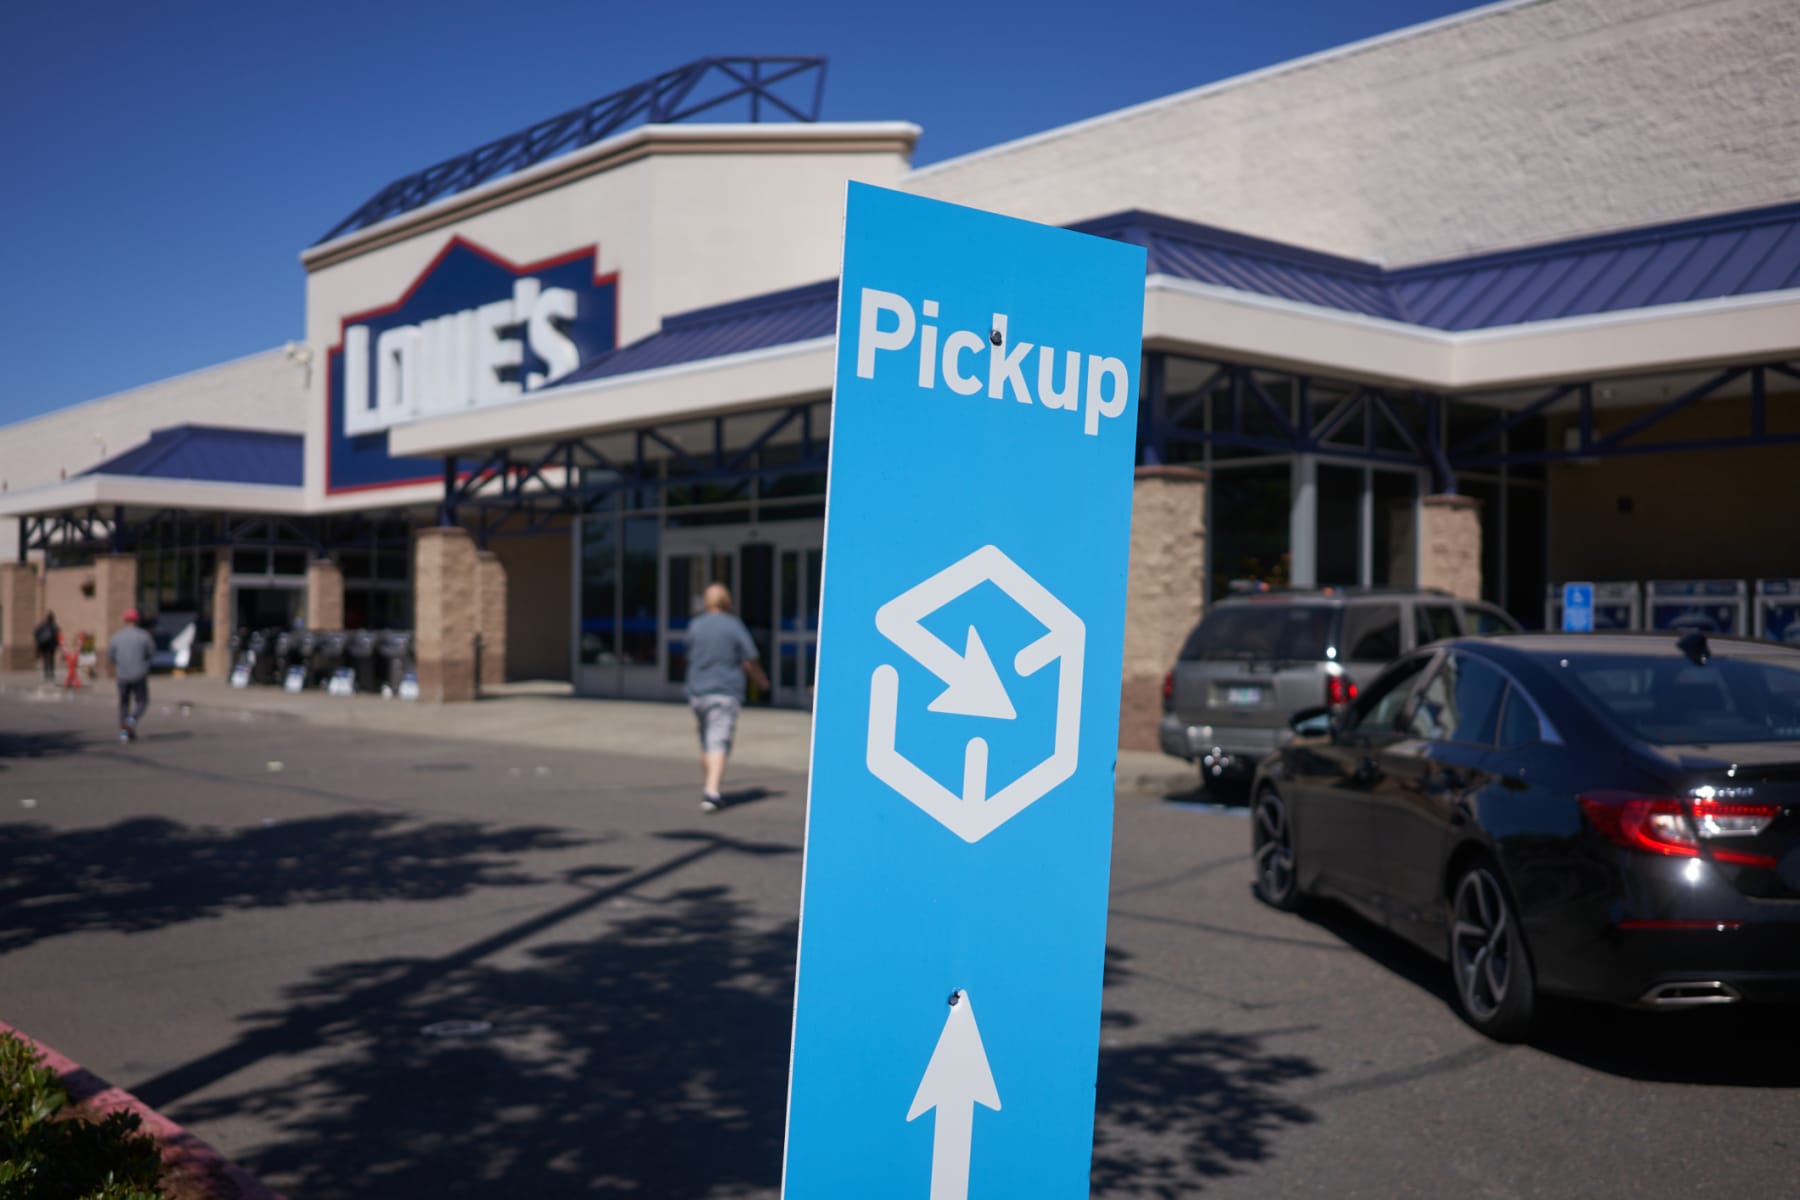 Pickup sign stands outside Lowe's store.